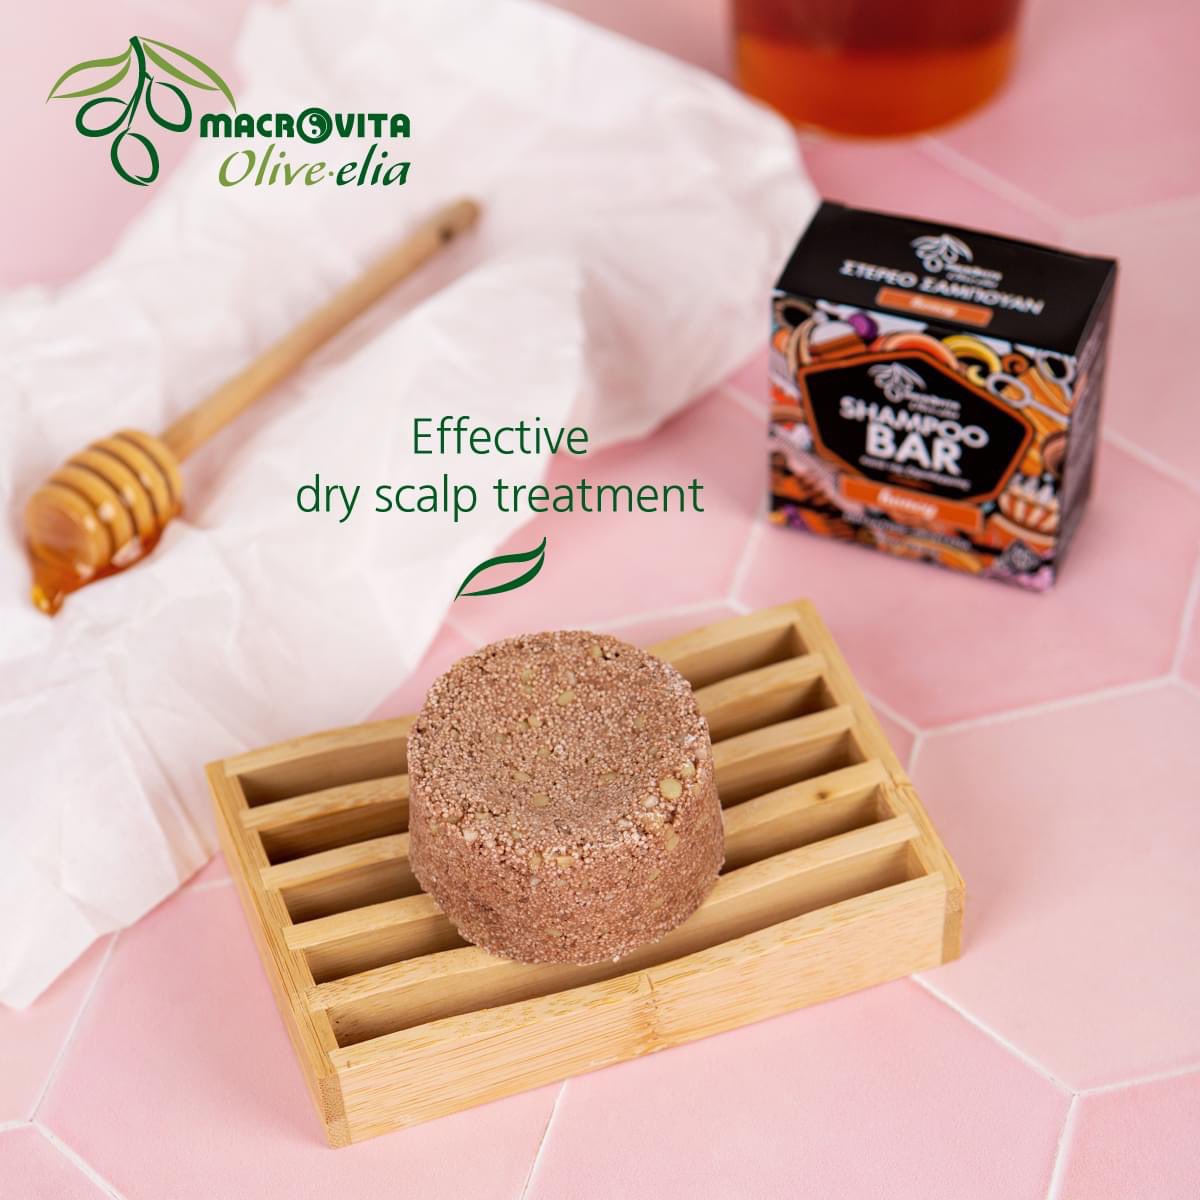 Shampoo Bar for Dry Scalp Honey cleanses hair effectively, while dealing with dry scalp and preventing its reappearance.
#MacrovitaCanada #Olivelia #Hair #DryScalp #Shampoo #ShampooBar #Honey